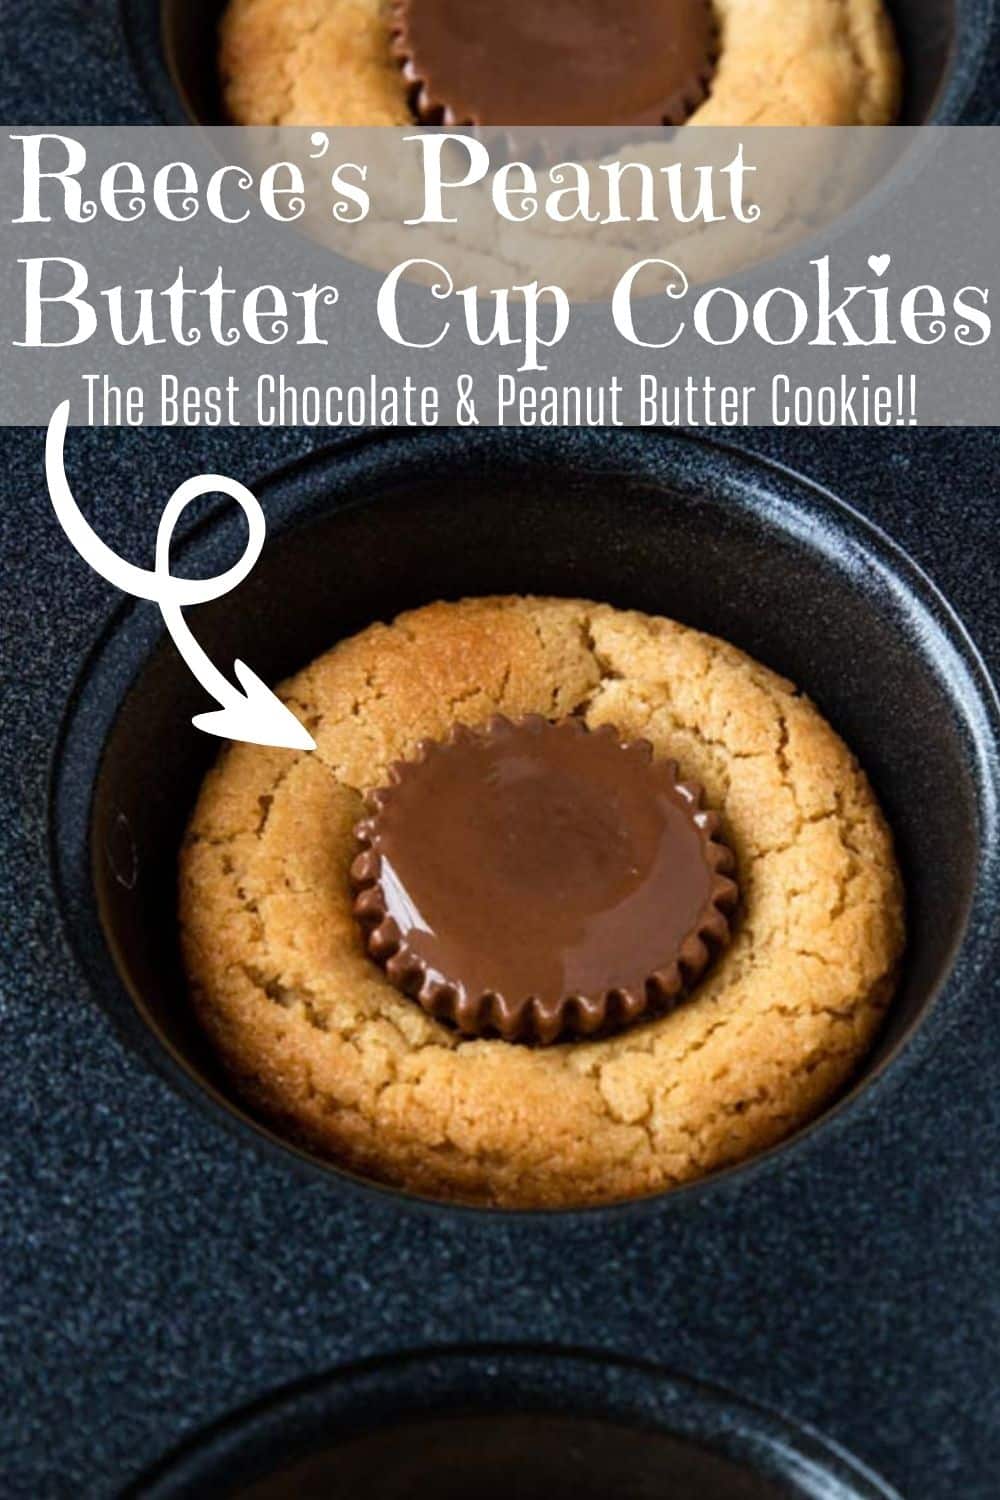 Text overlay for Pinterest for Reece's Peanut Butter Cup Cookies